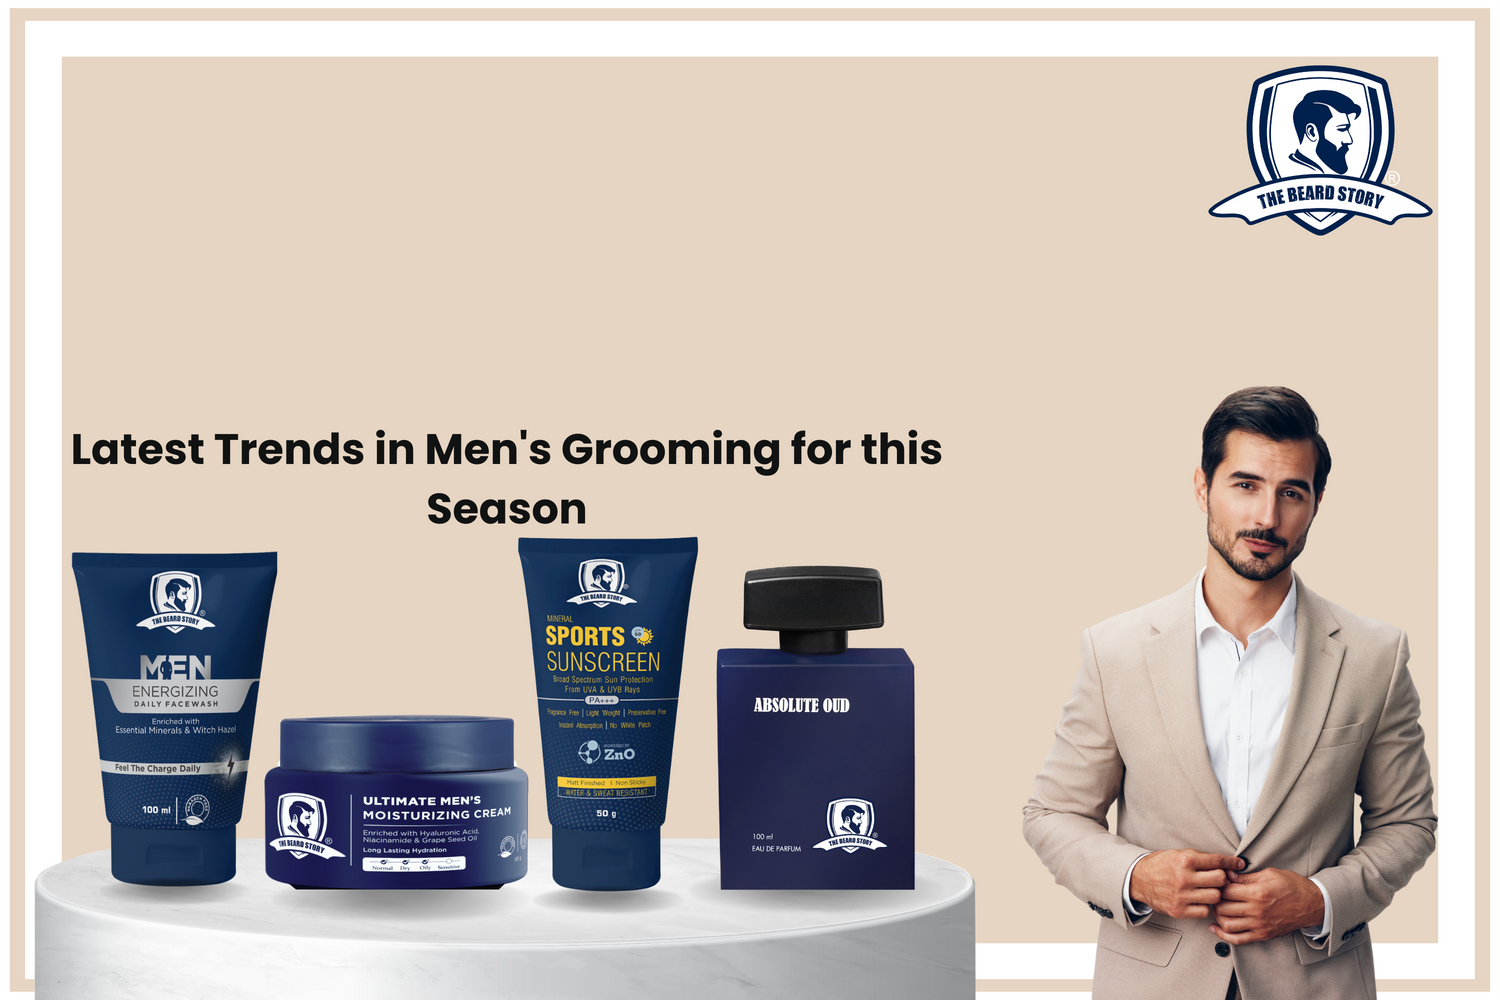 Latest Trends in Men's Grooming for this Season